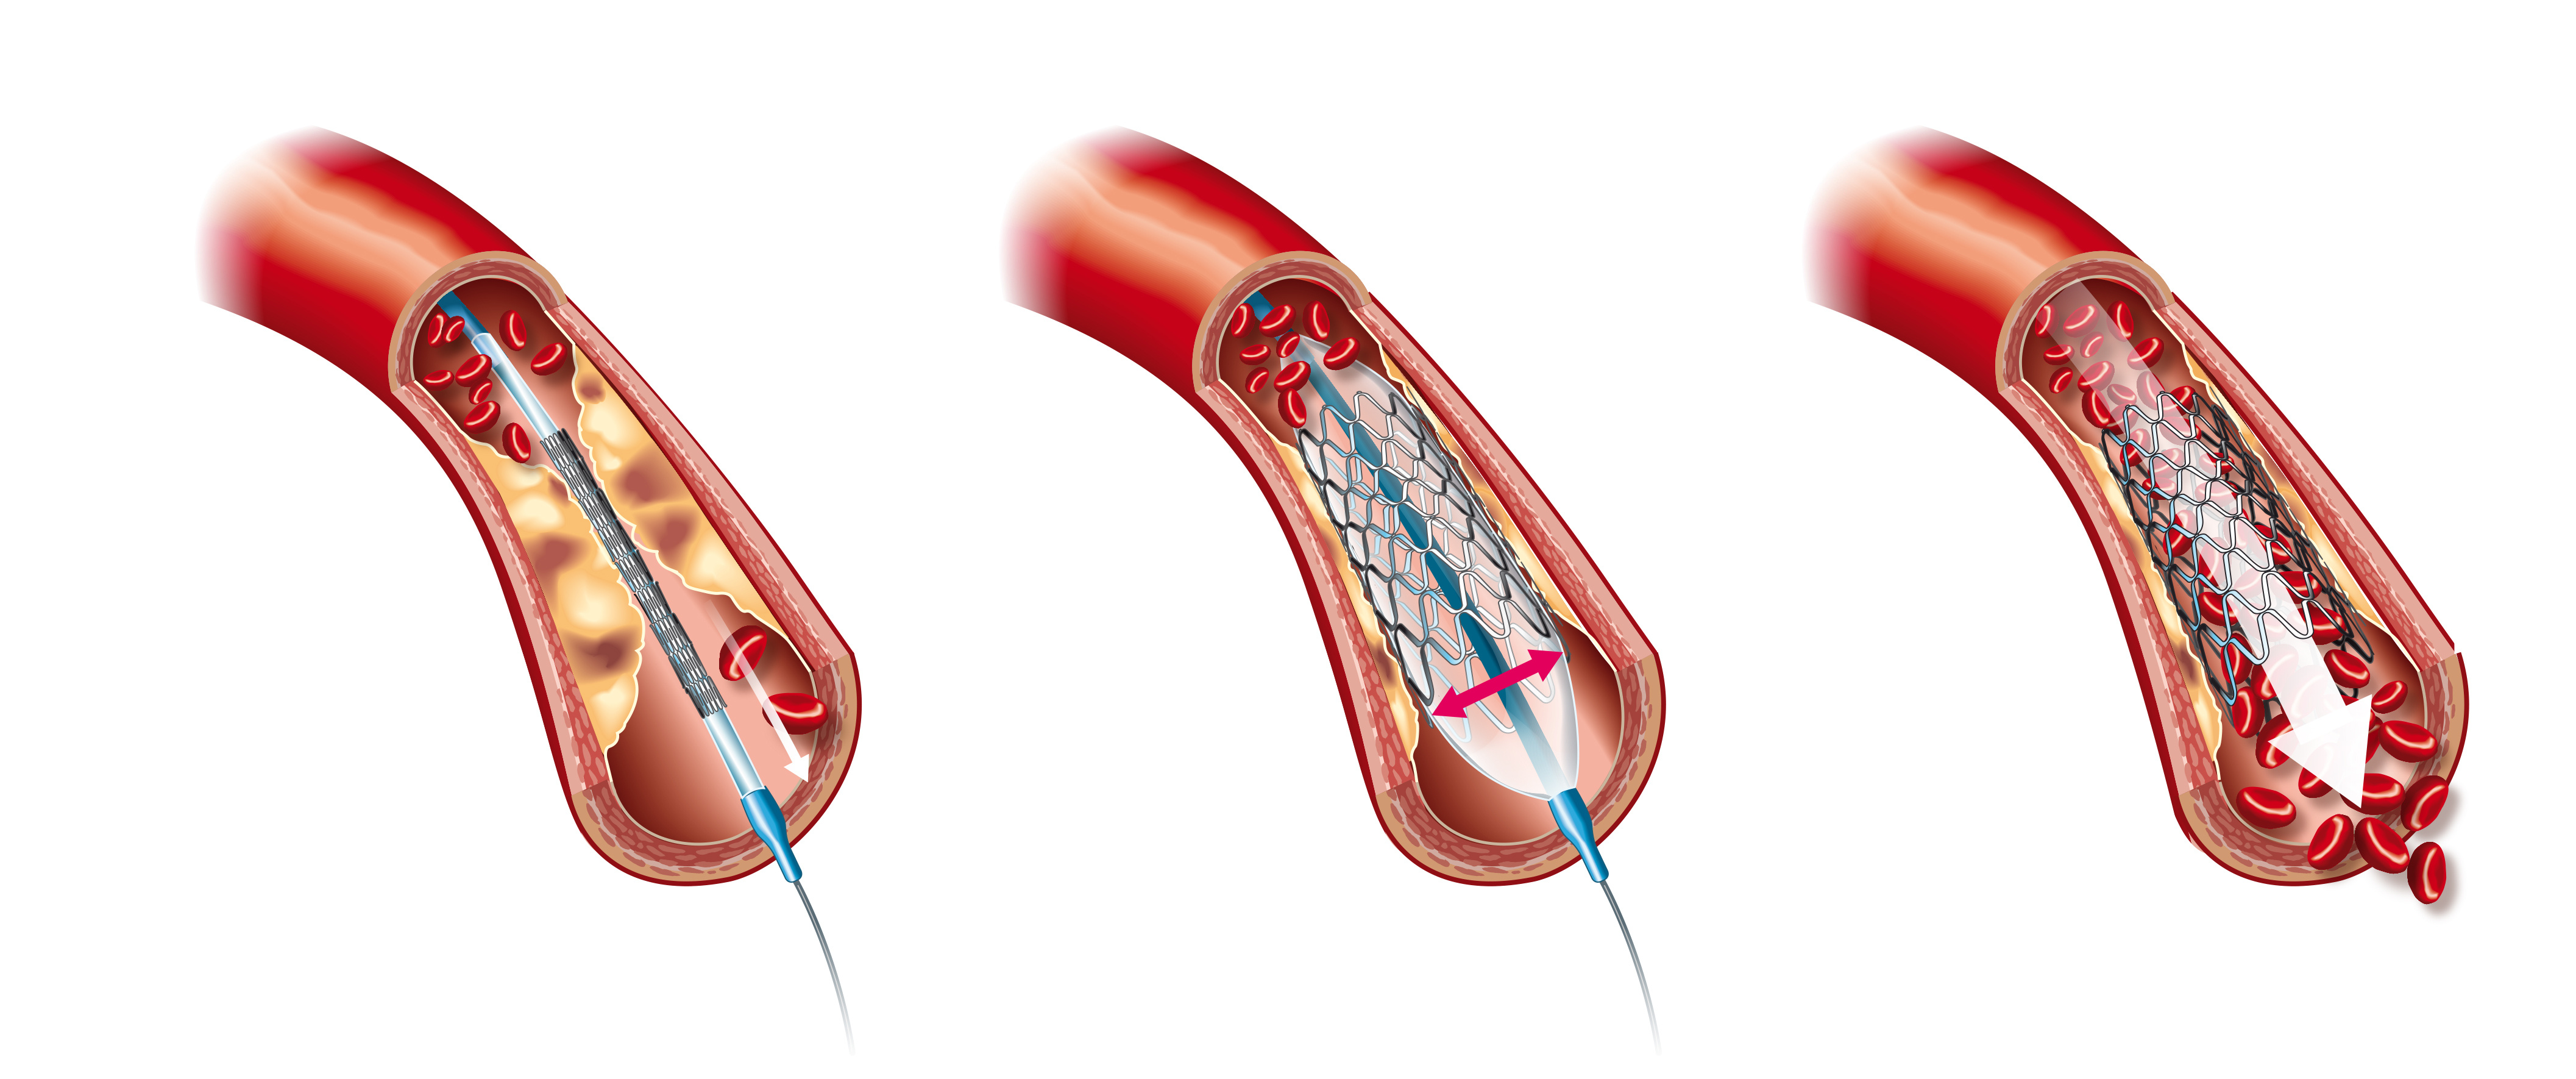 BIORESORBABLE SCAFFOLDS -  The New Age Dissolving Stents